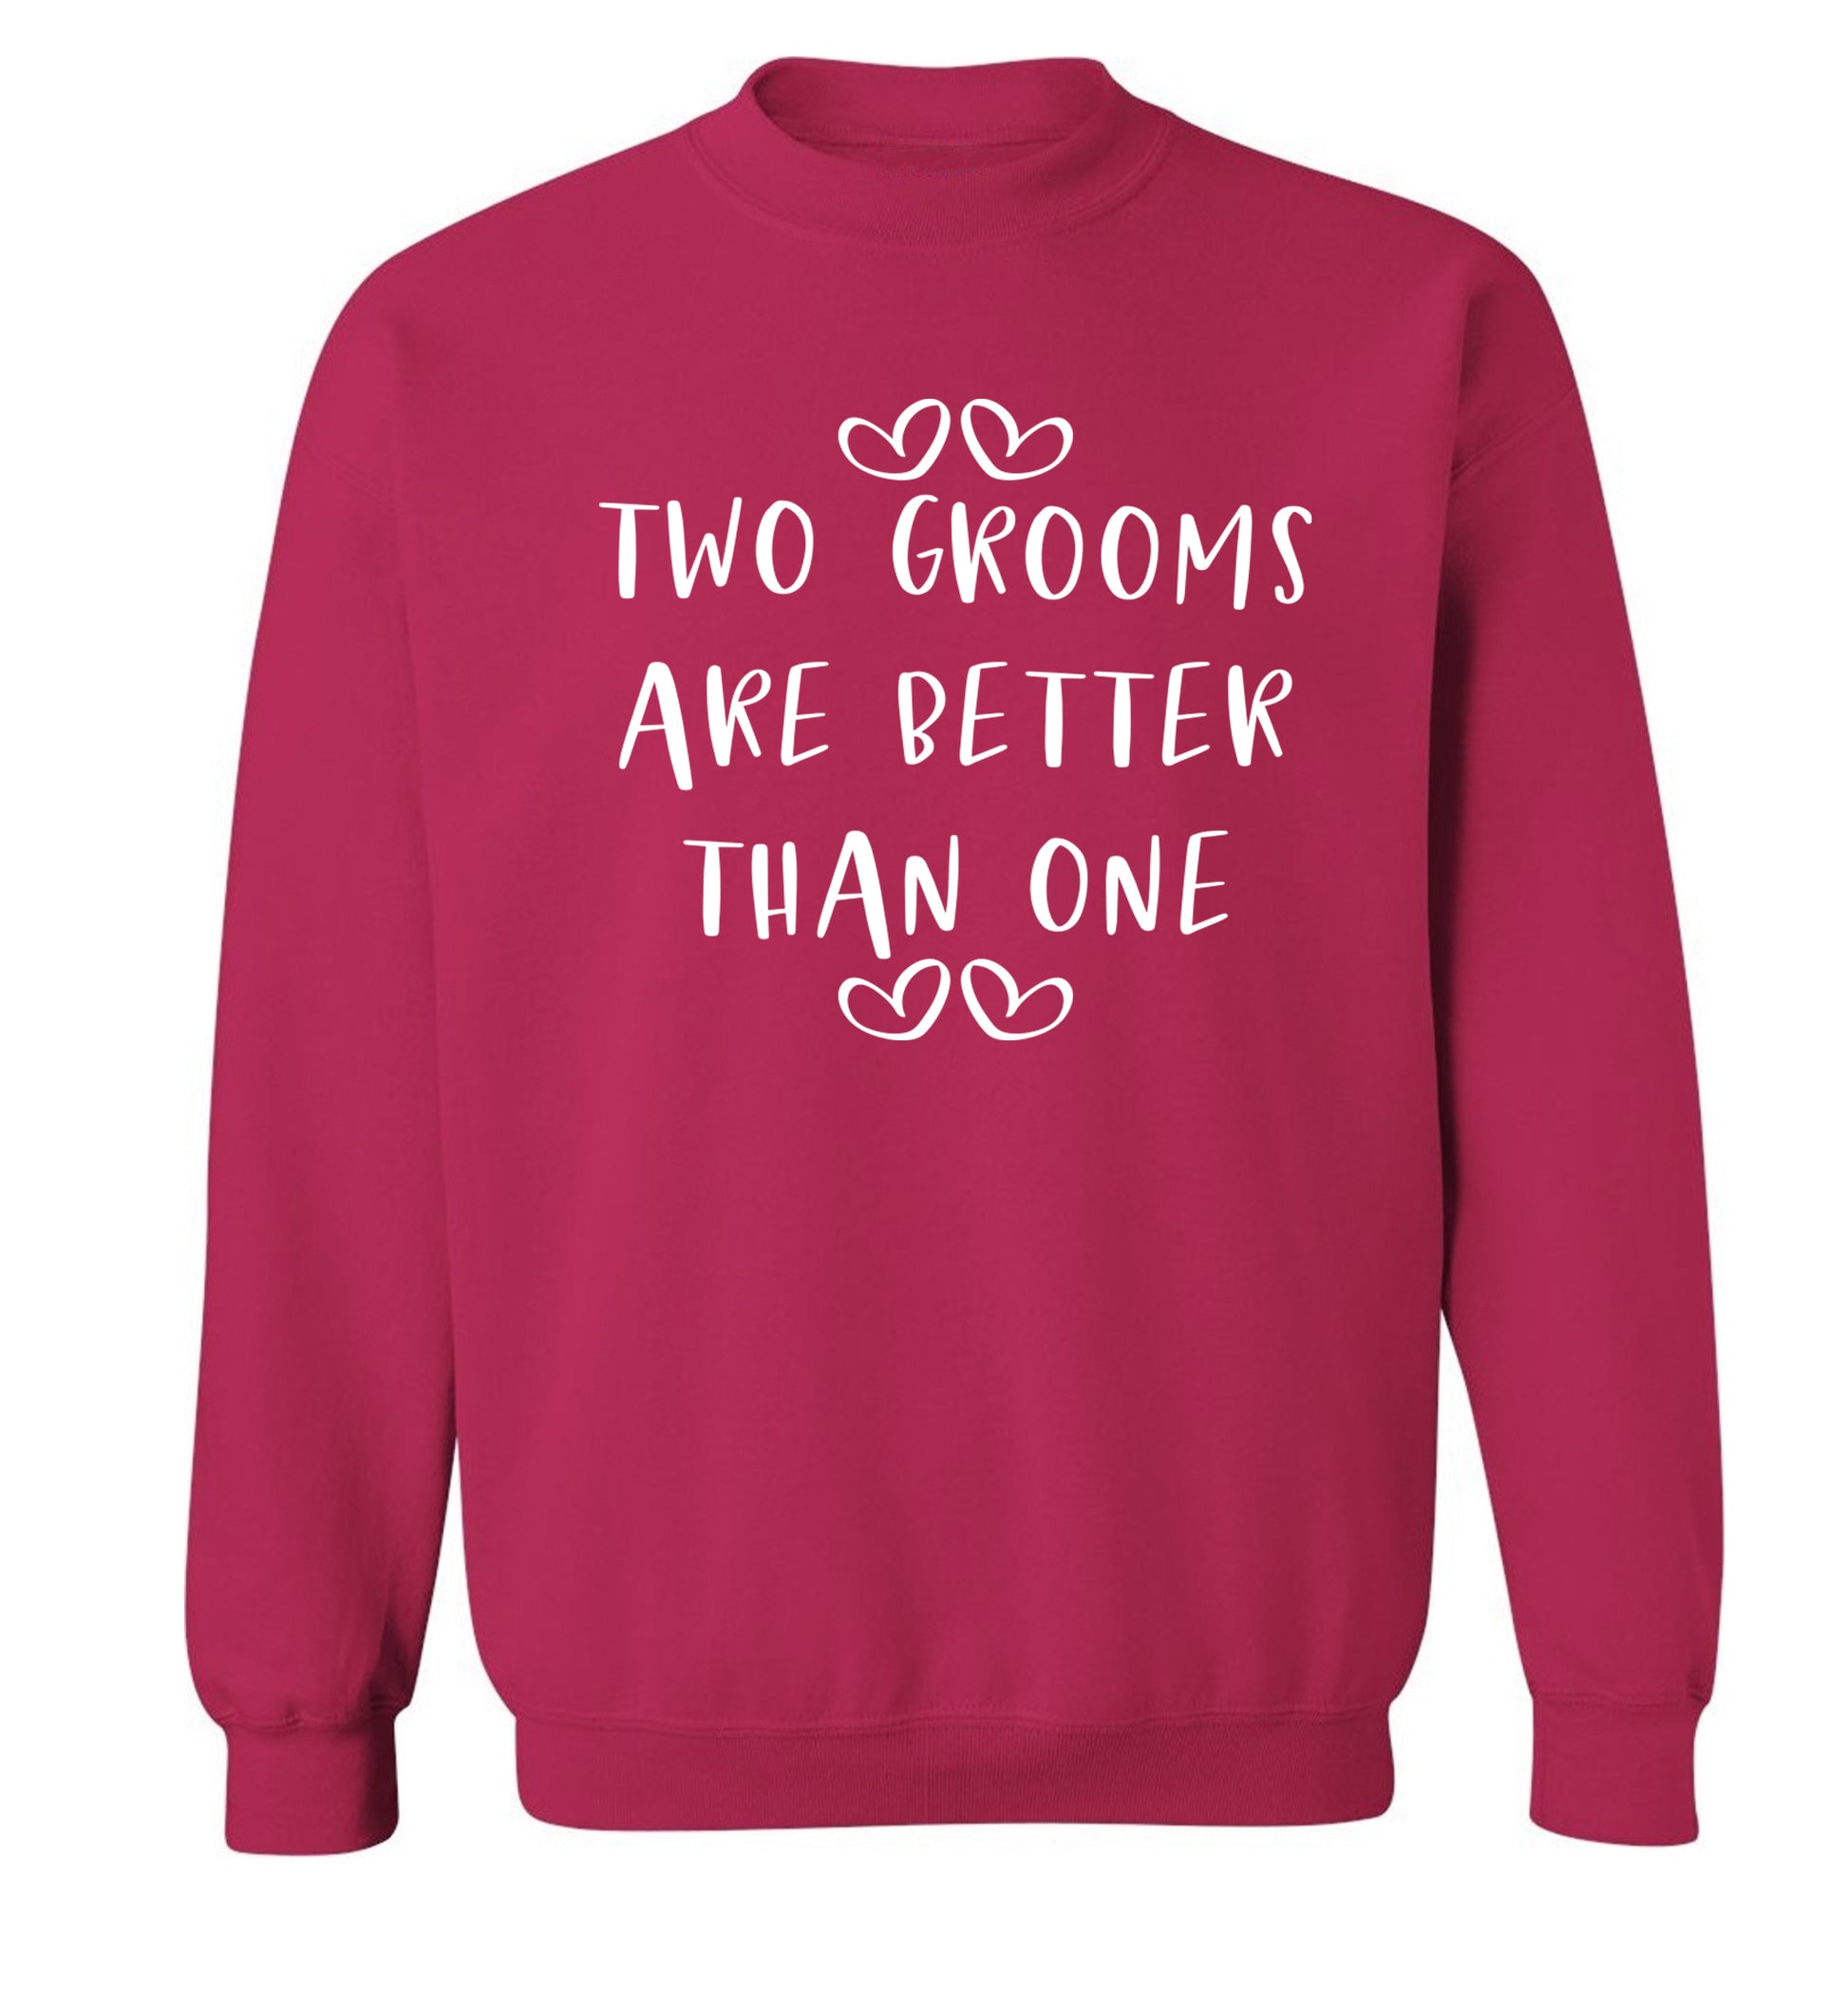 Two grooms are better than one adult's unisex pink sweater 2XL